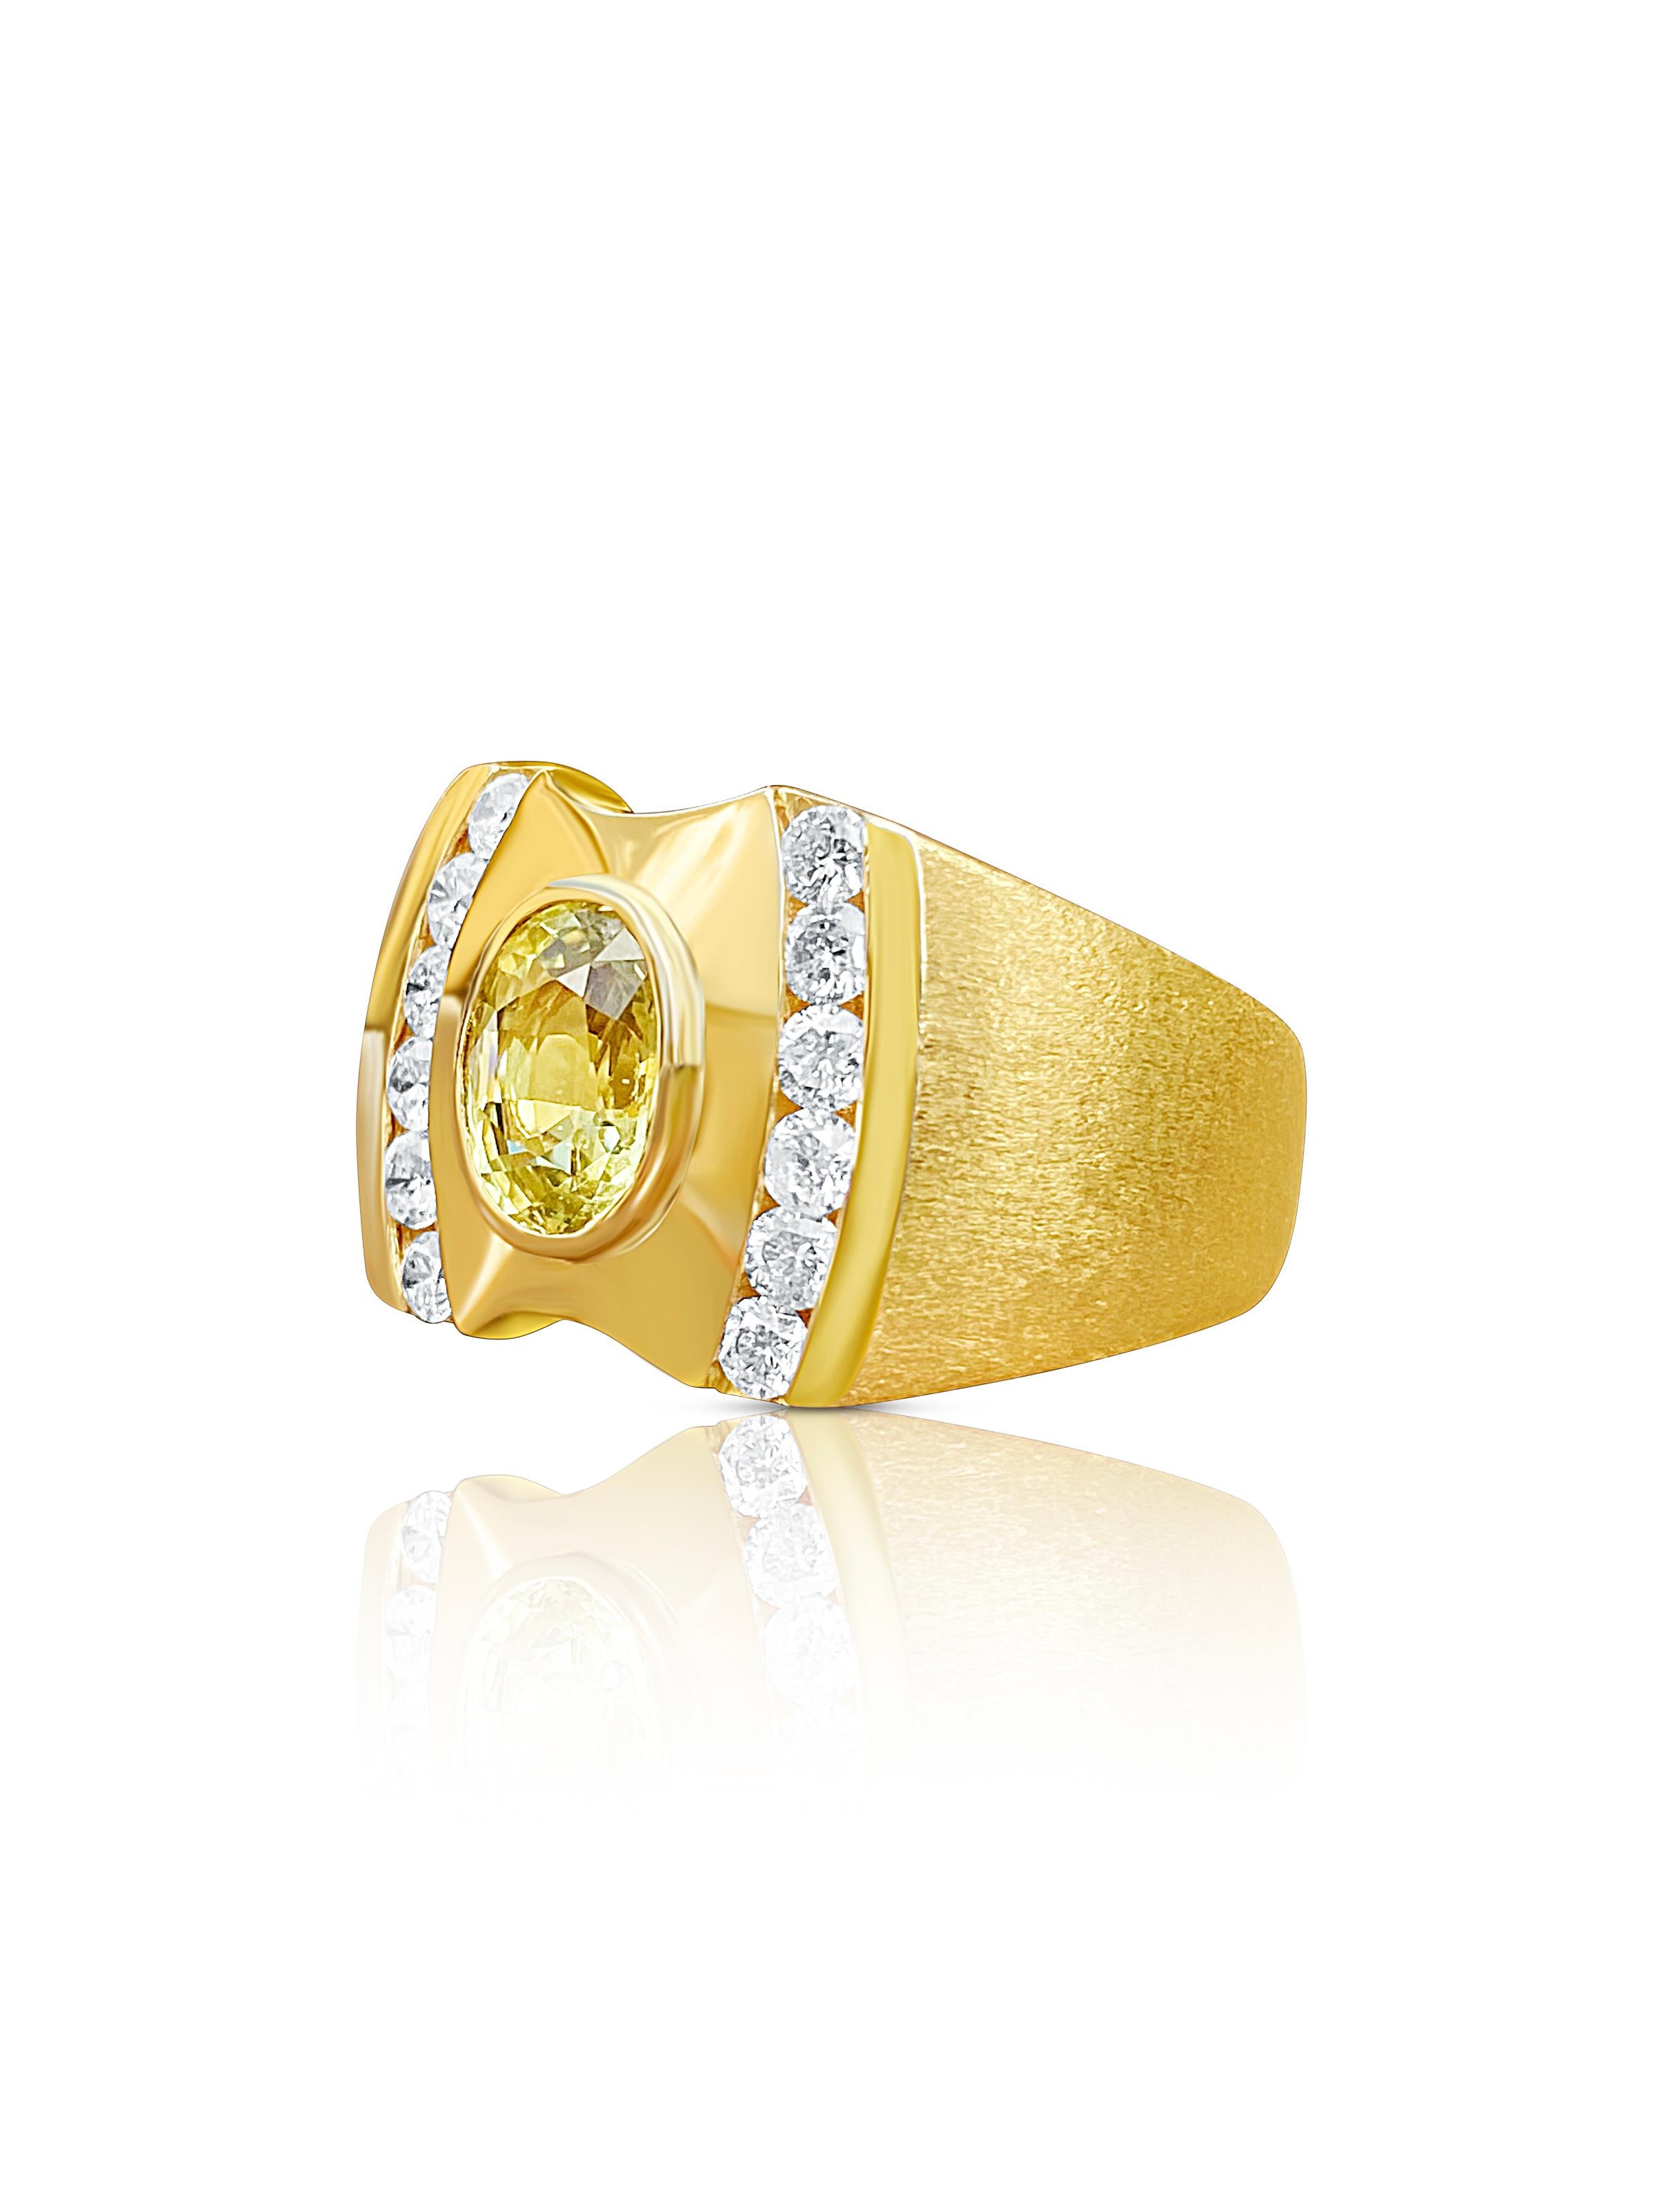 Centering a 2.55 Carat Oval-Cut Yellow Ceylon Sapphire, framed by 12 Round-Brilliant Cut Diamonds, and set in 14K Yellow Gold, this men's ring style is timeless for a reason– and the Yellow Sapphire vivid as possible!

Details: 
✔ Stone: Sapphire
✔